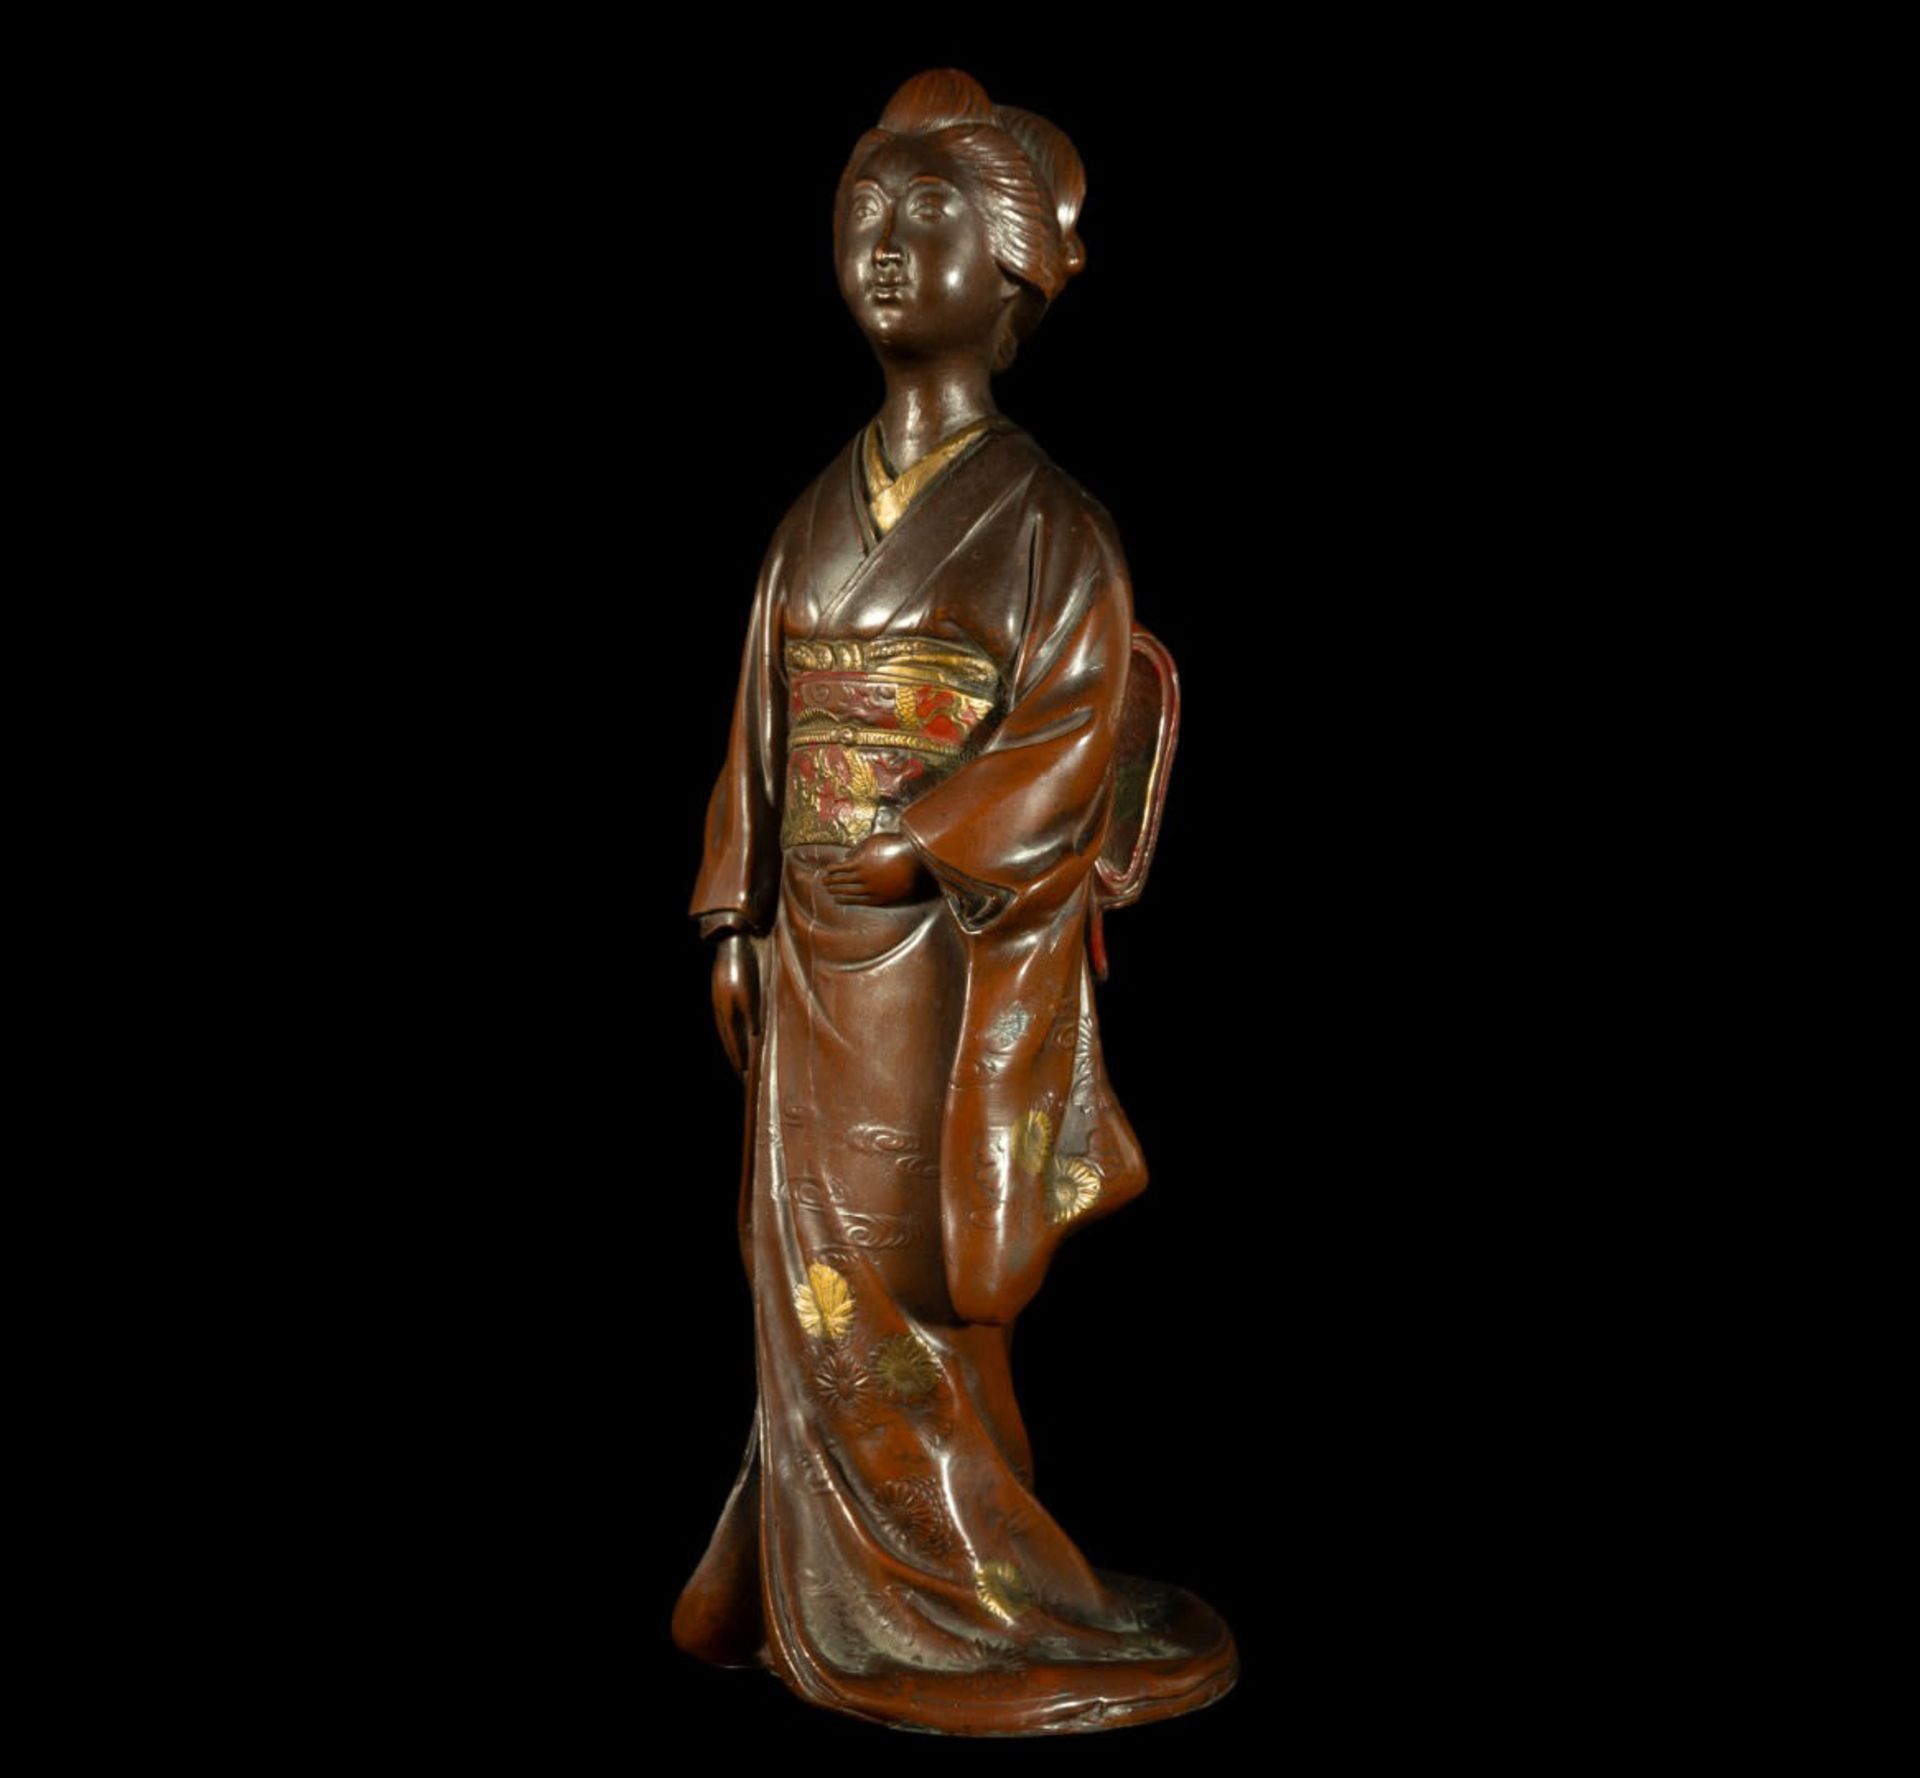 Exquisite Japanese Meiji Geisha in carved and gold-gilt "repoussé" copper, 19th century - Image 2 of 7